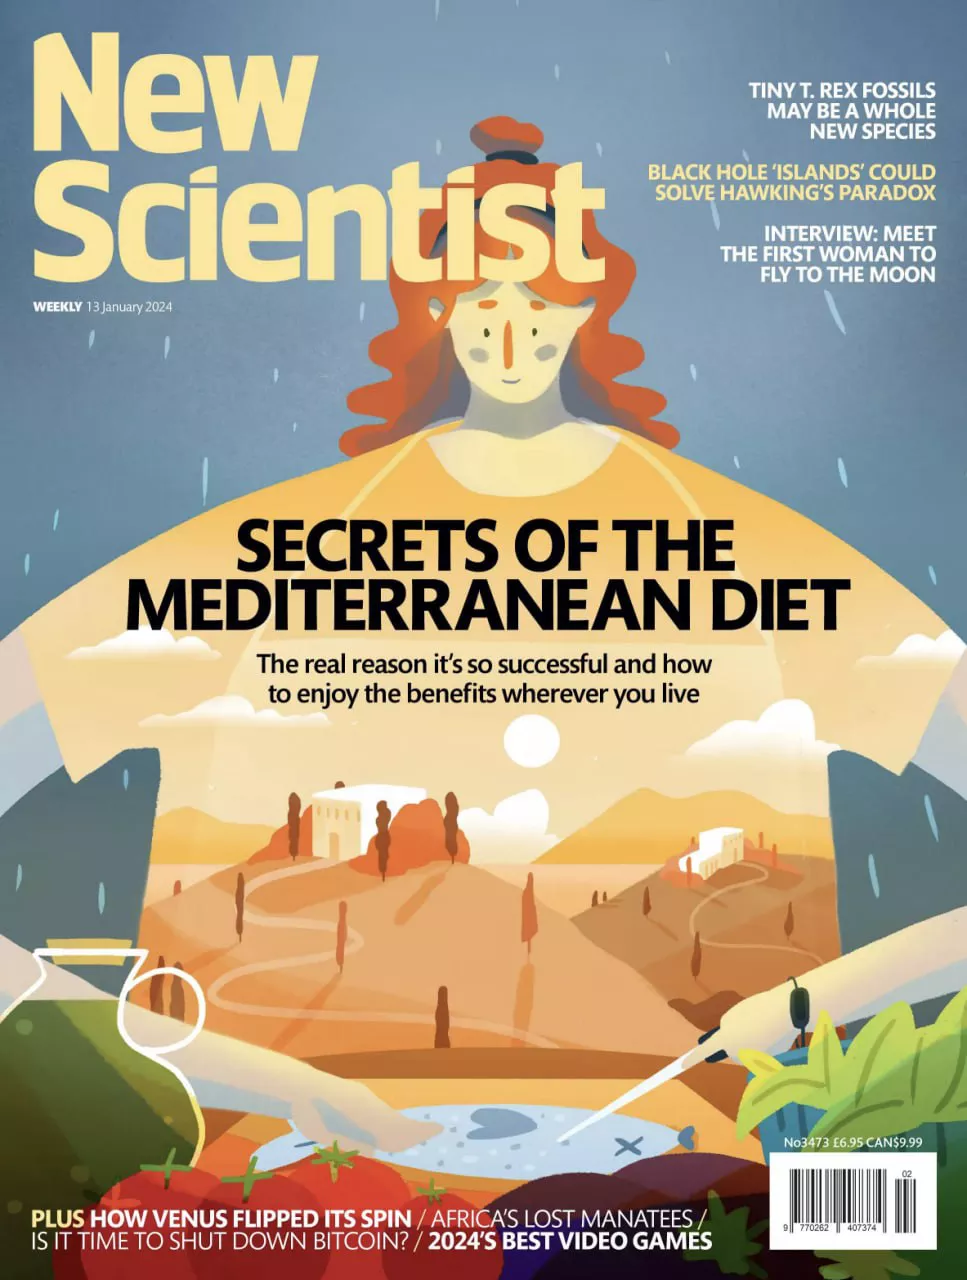 New Scientist - 13 January 2024 (science)